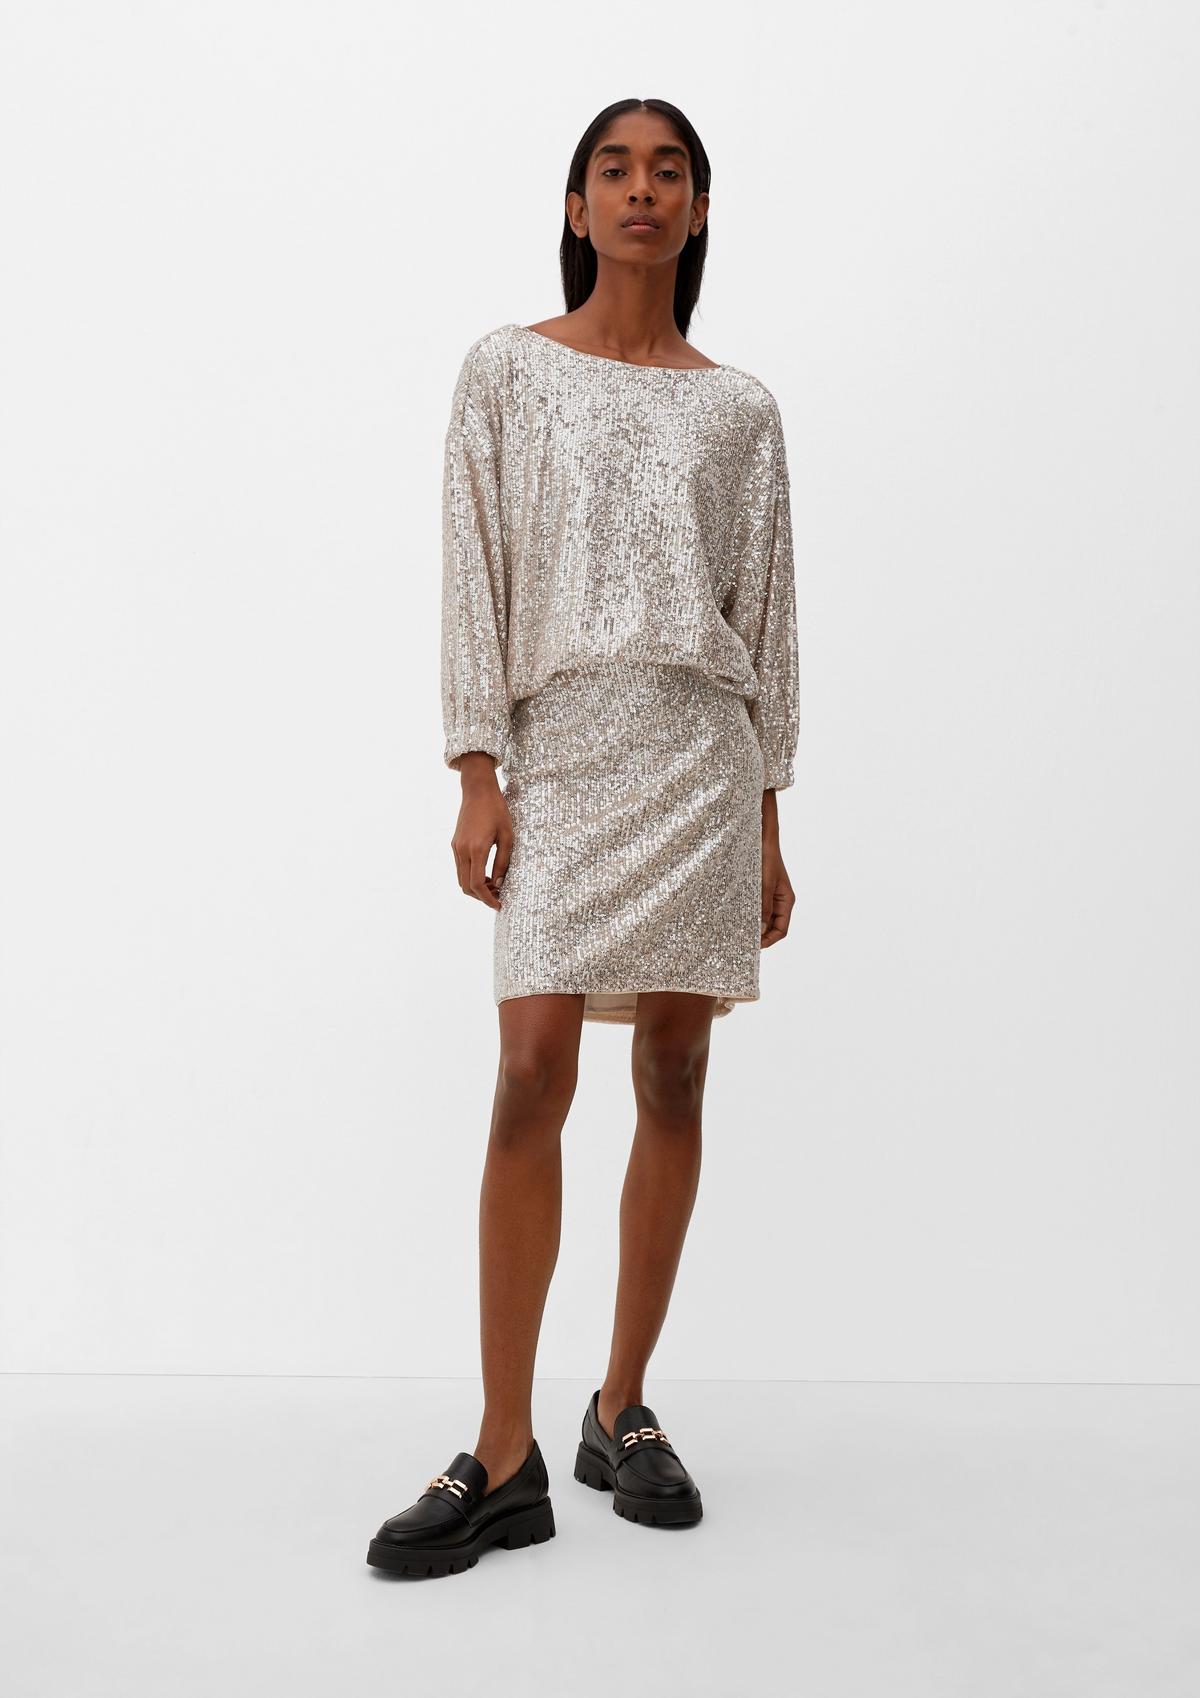 s.Oliver Mini skirt with sequins